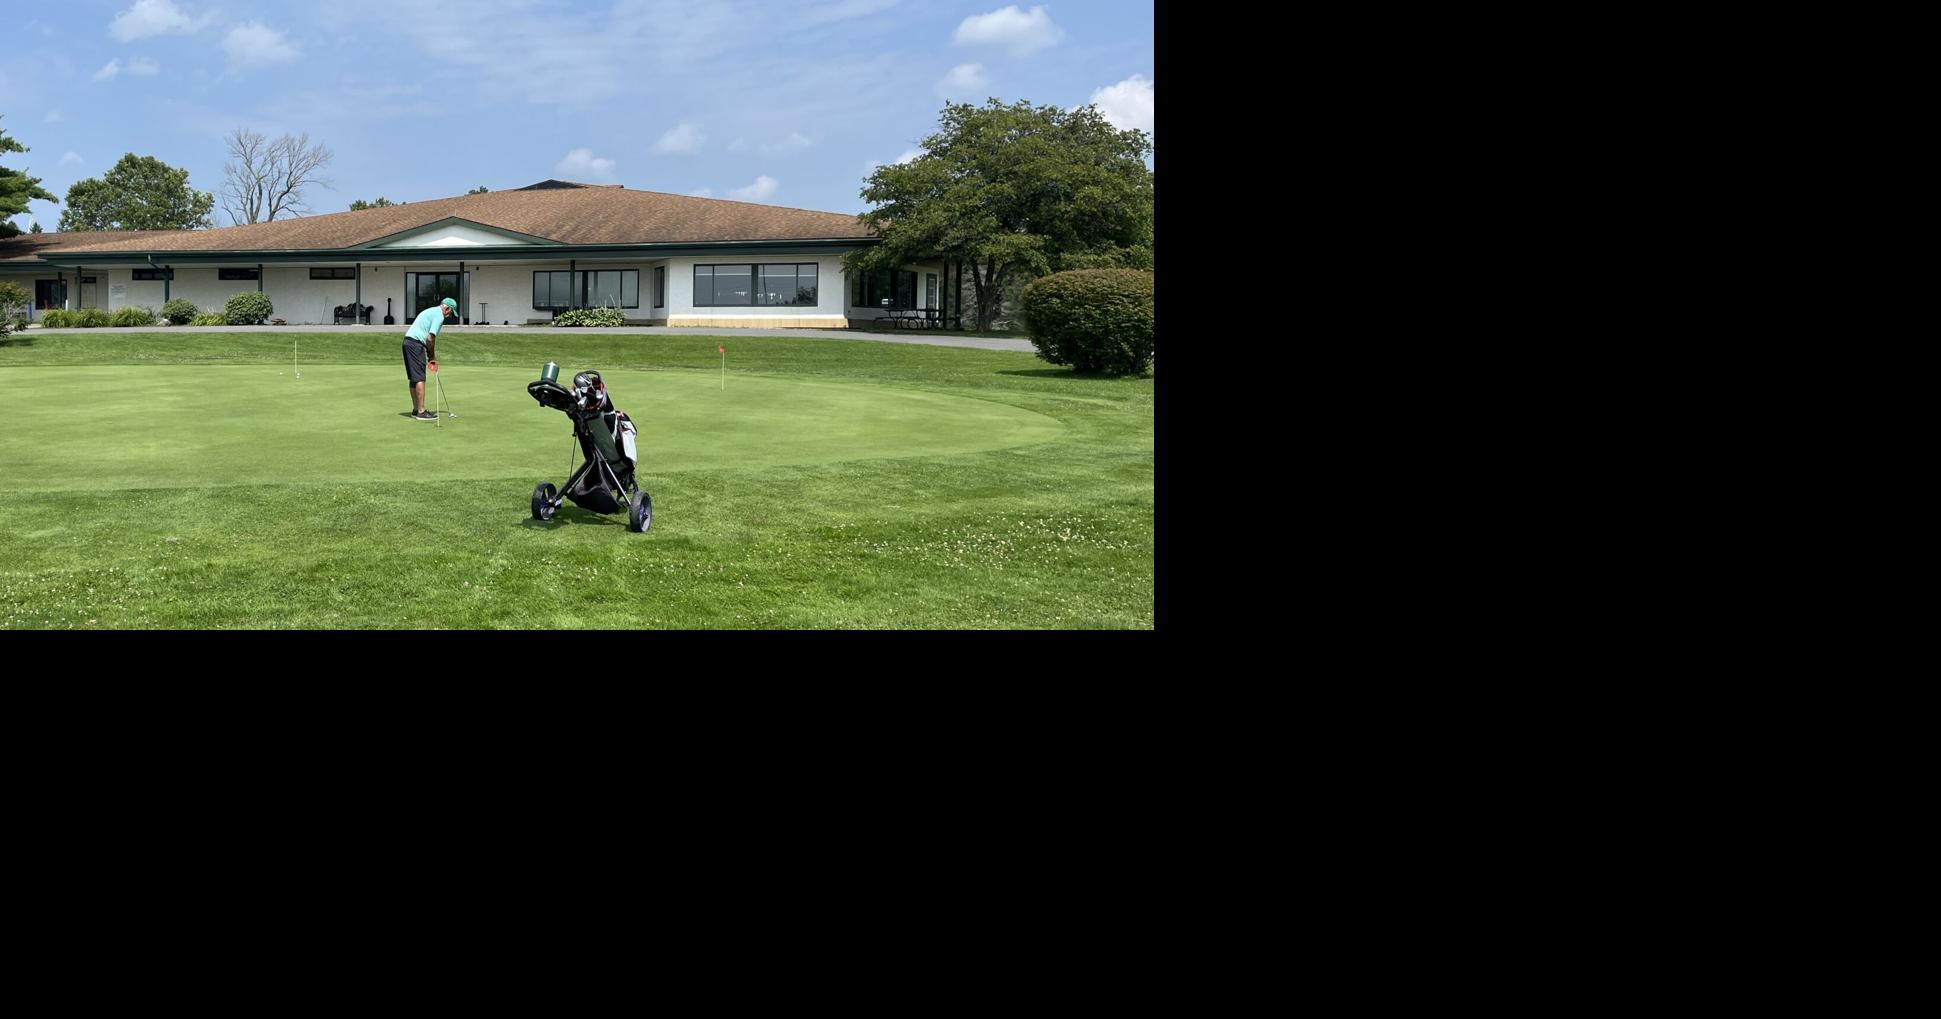 Owasco golf course sold: What are the buyer's plans?